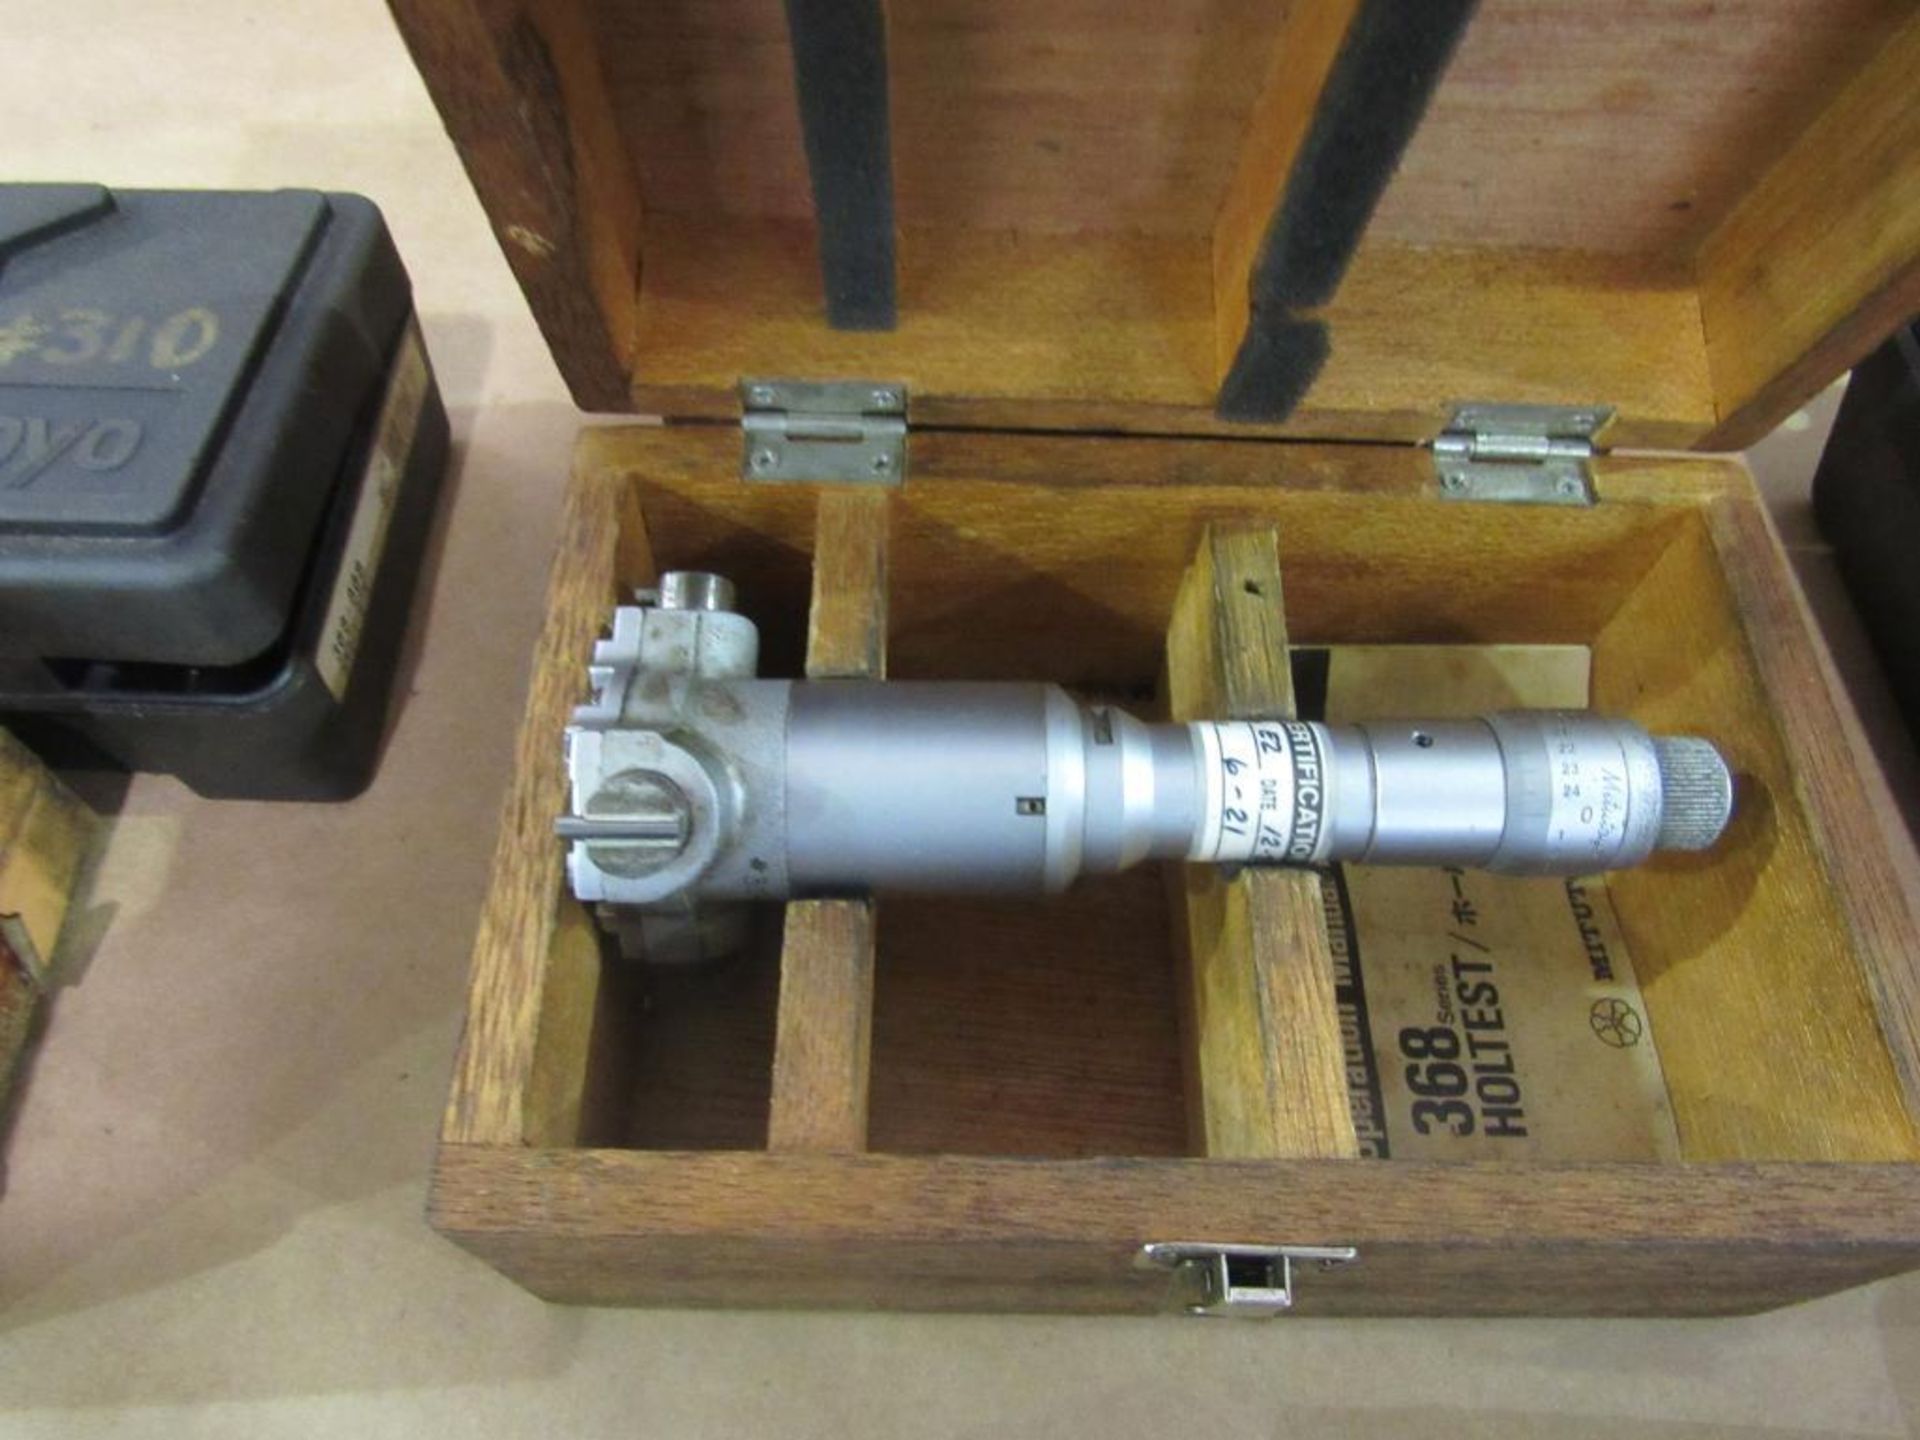 Lot of 2: (1) Mitutoyo Hole Micrometer, 2.0 - 2.4, (1) Mitutoyo Hole Micrometer, 2.4 - 2.8 - Image 3 of 6